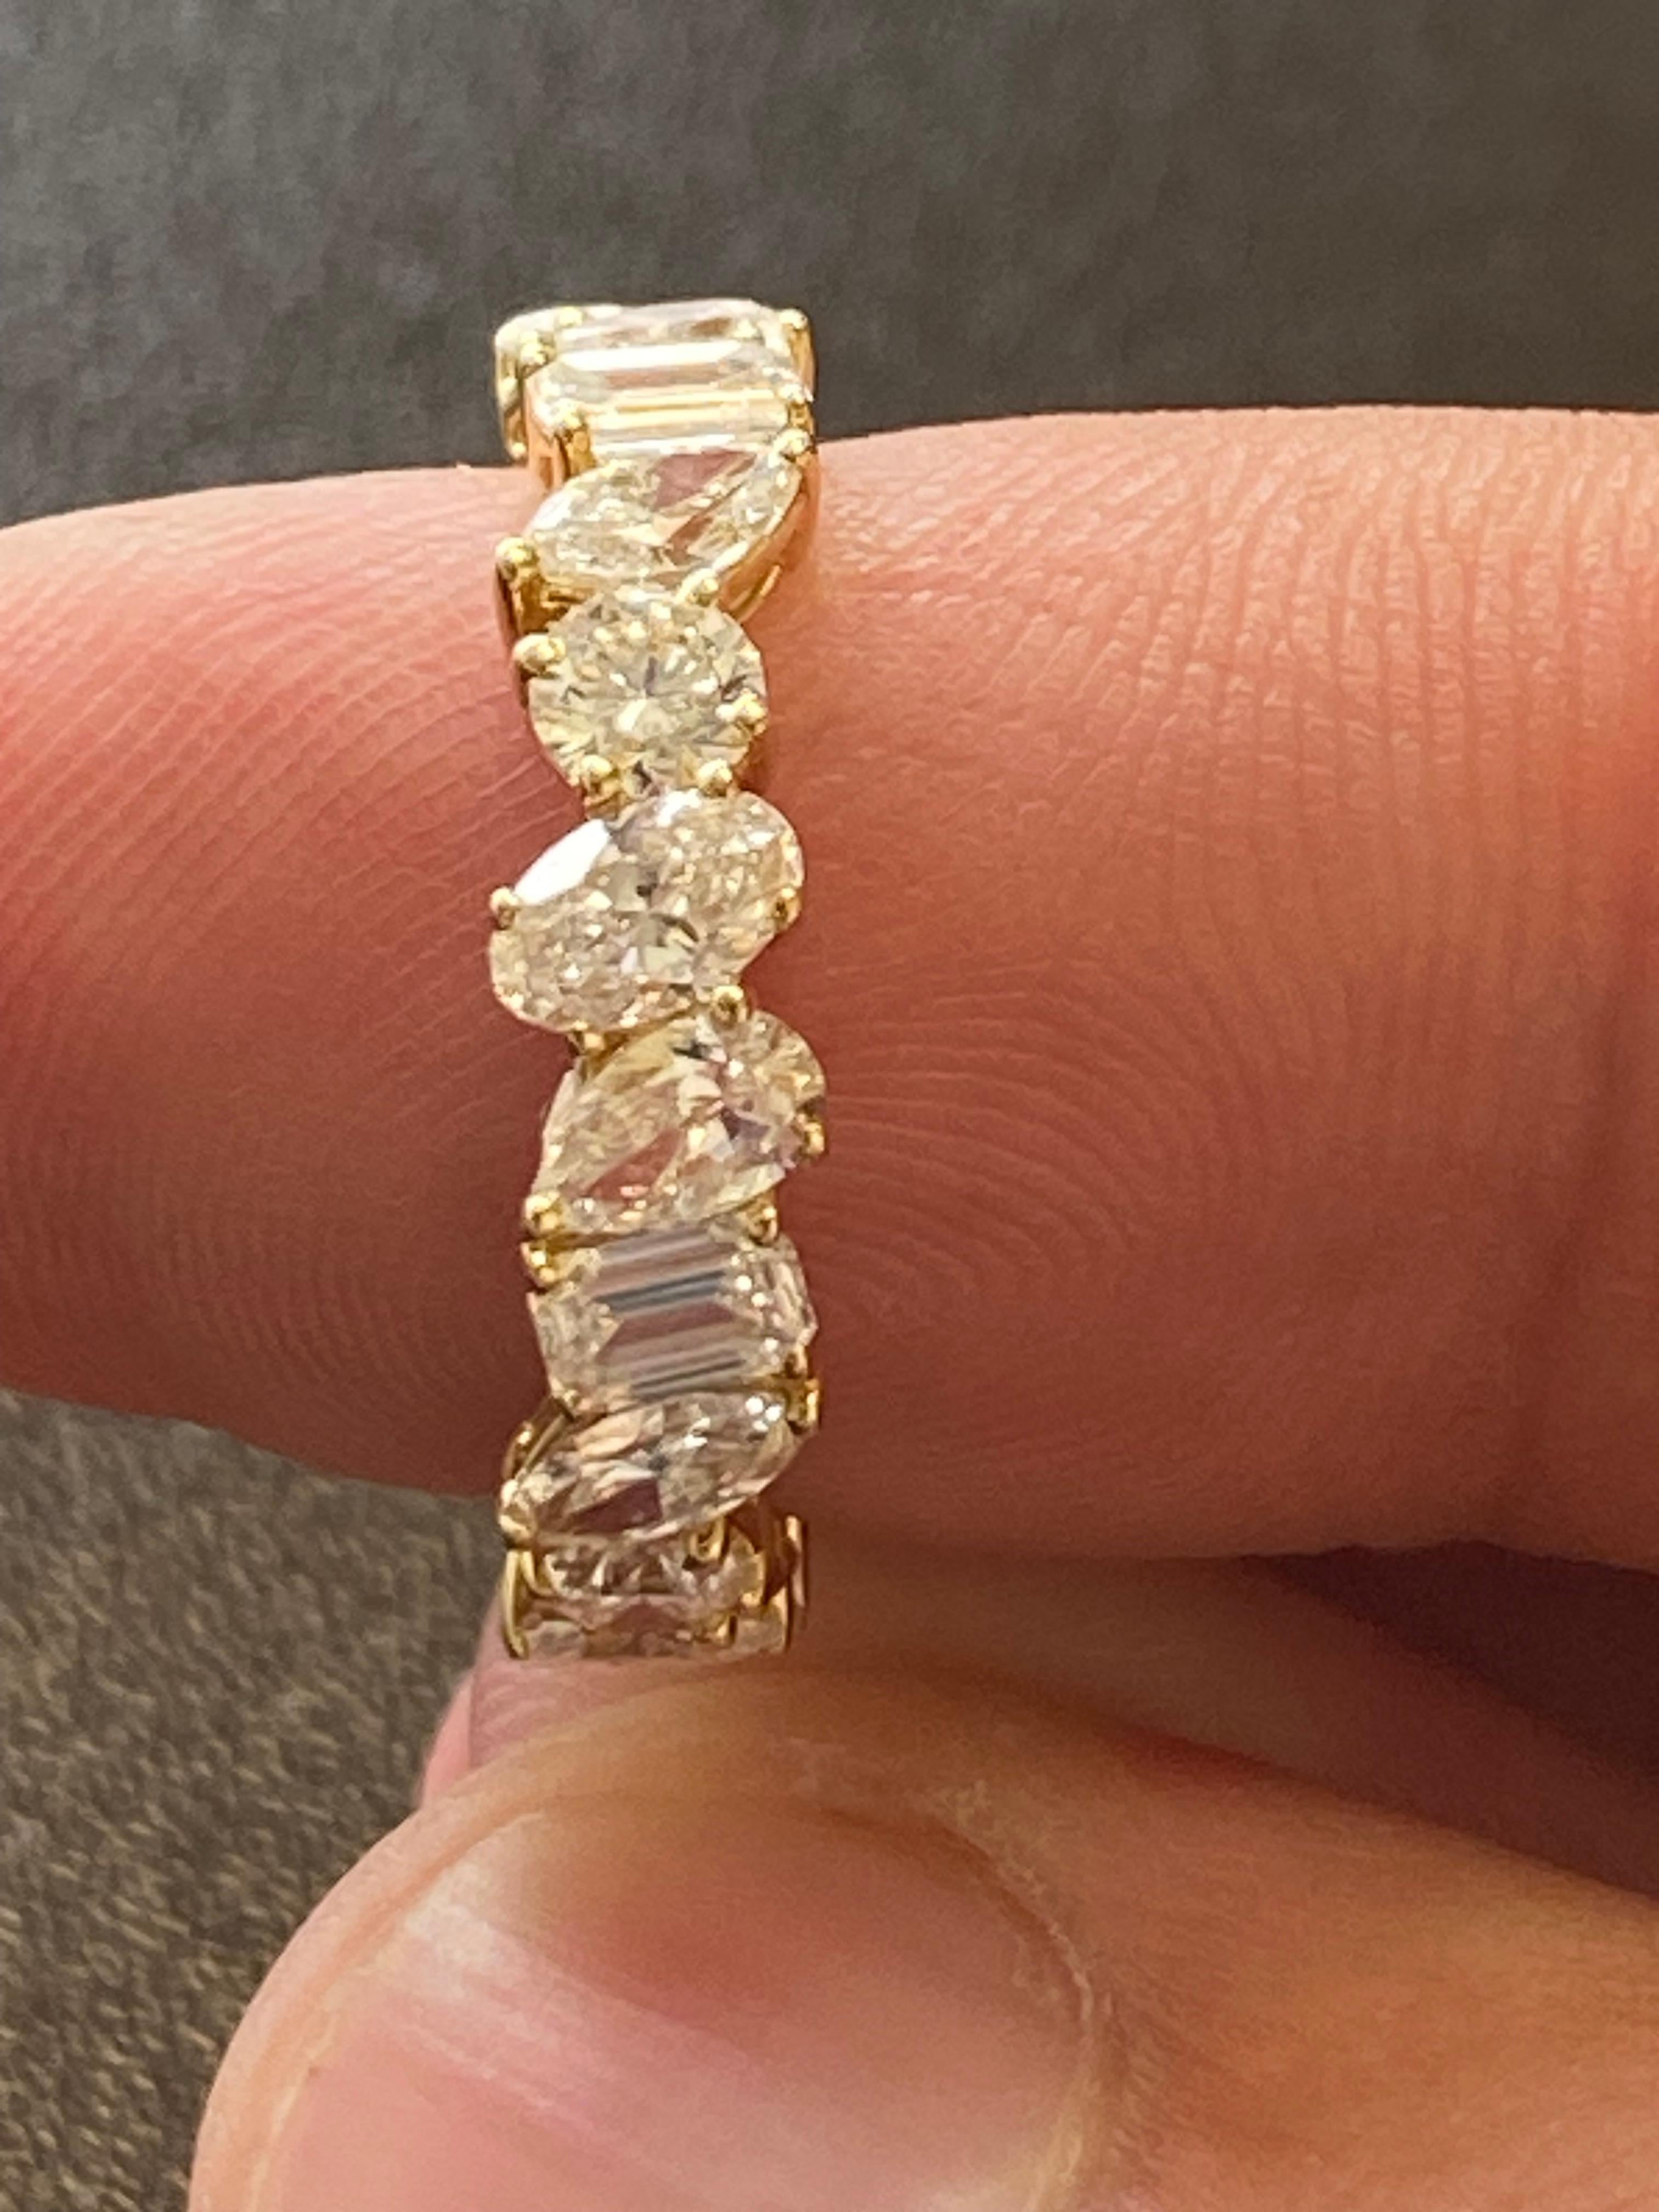 Multishape diamond eternity ring set in 18K yellow gold. The ring is set with a combination of emerald, round, pear, oval, and marquise diamonds. The total weight is 3.56 carats. The color of the stones are F and VS1 clarity. The ring is a size 6.